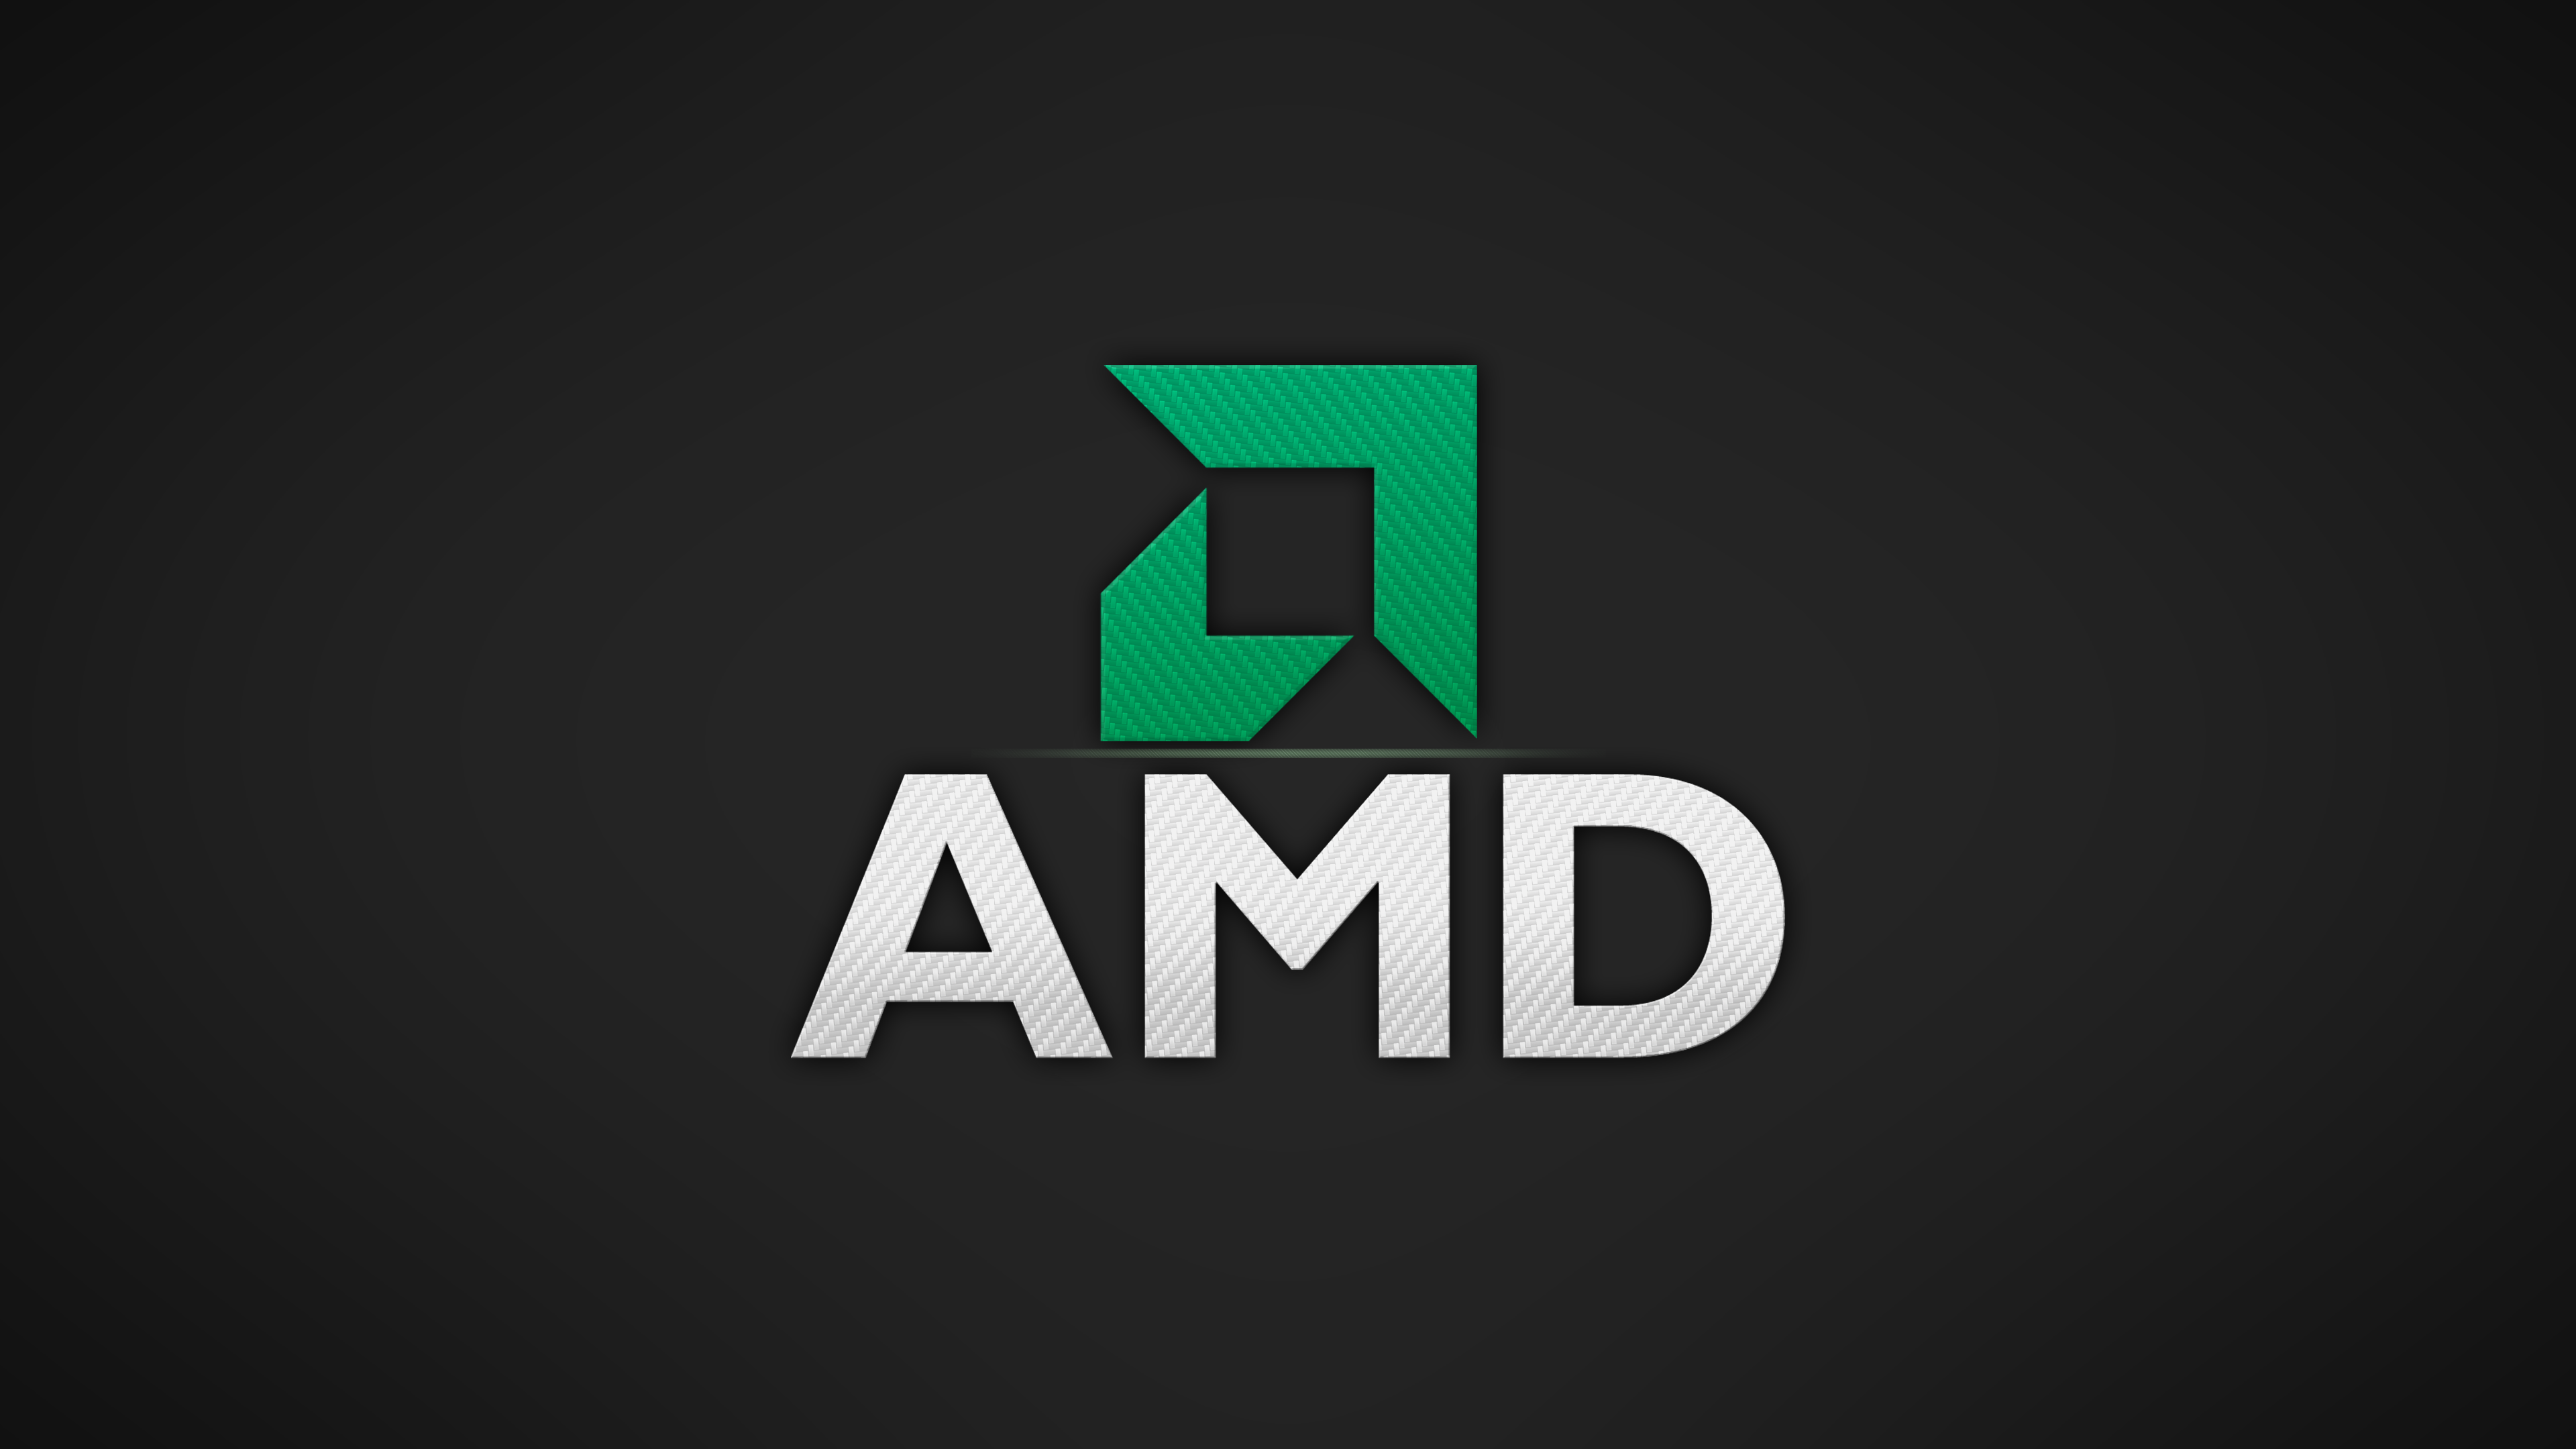 Amazing Amd Wallpaper Full HD Pictures